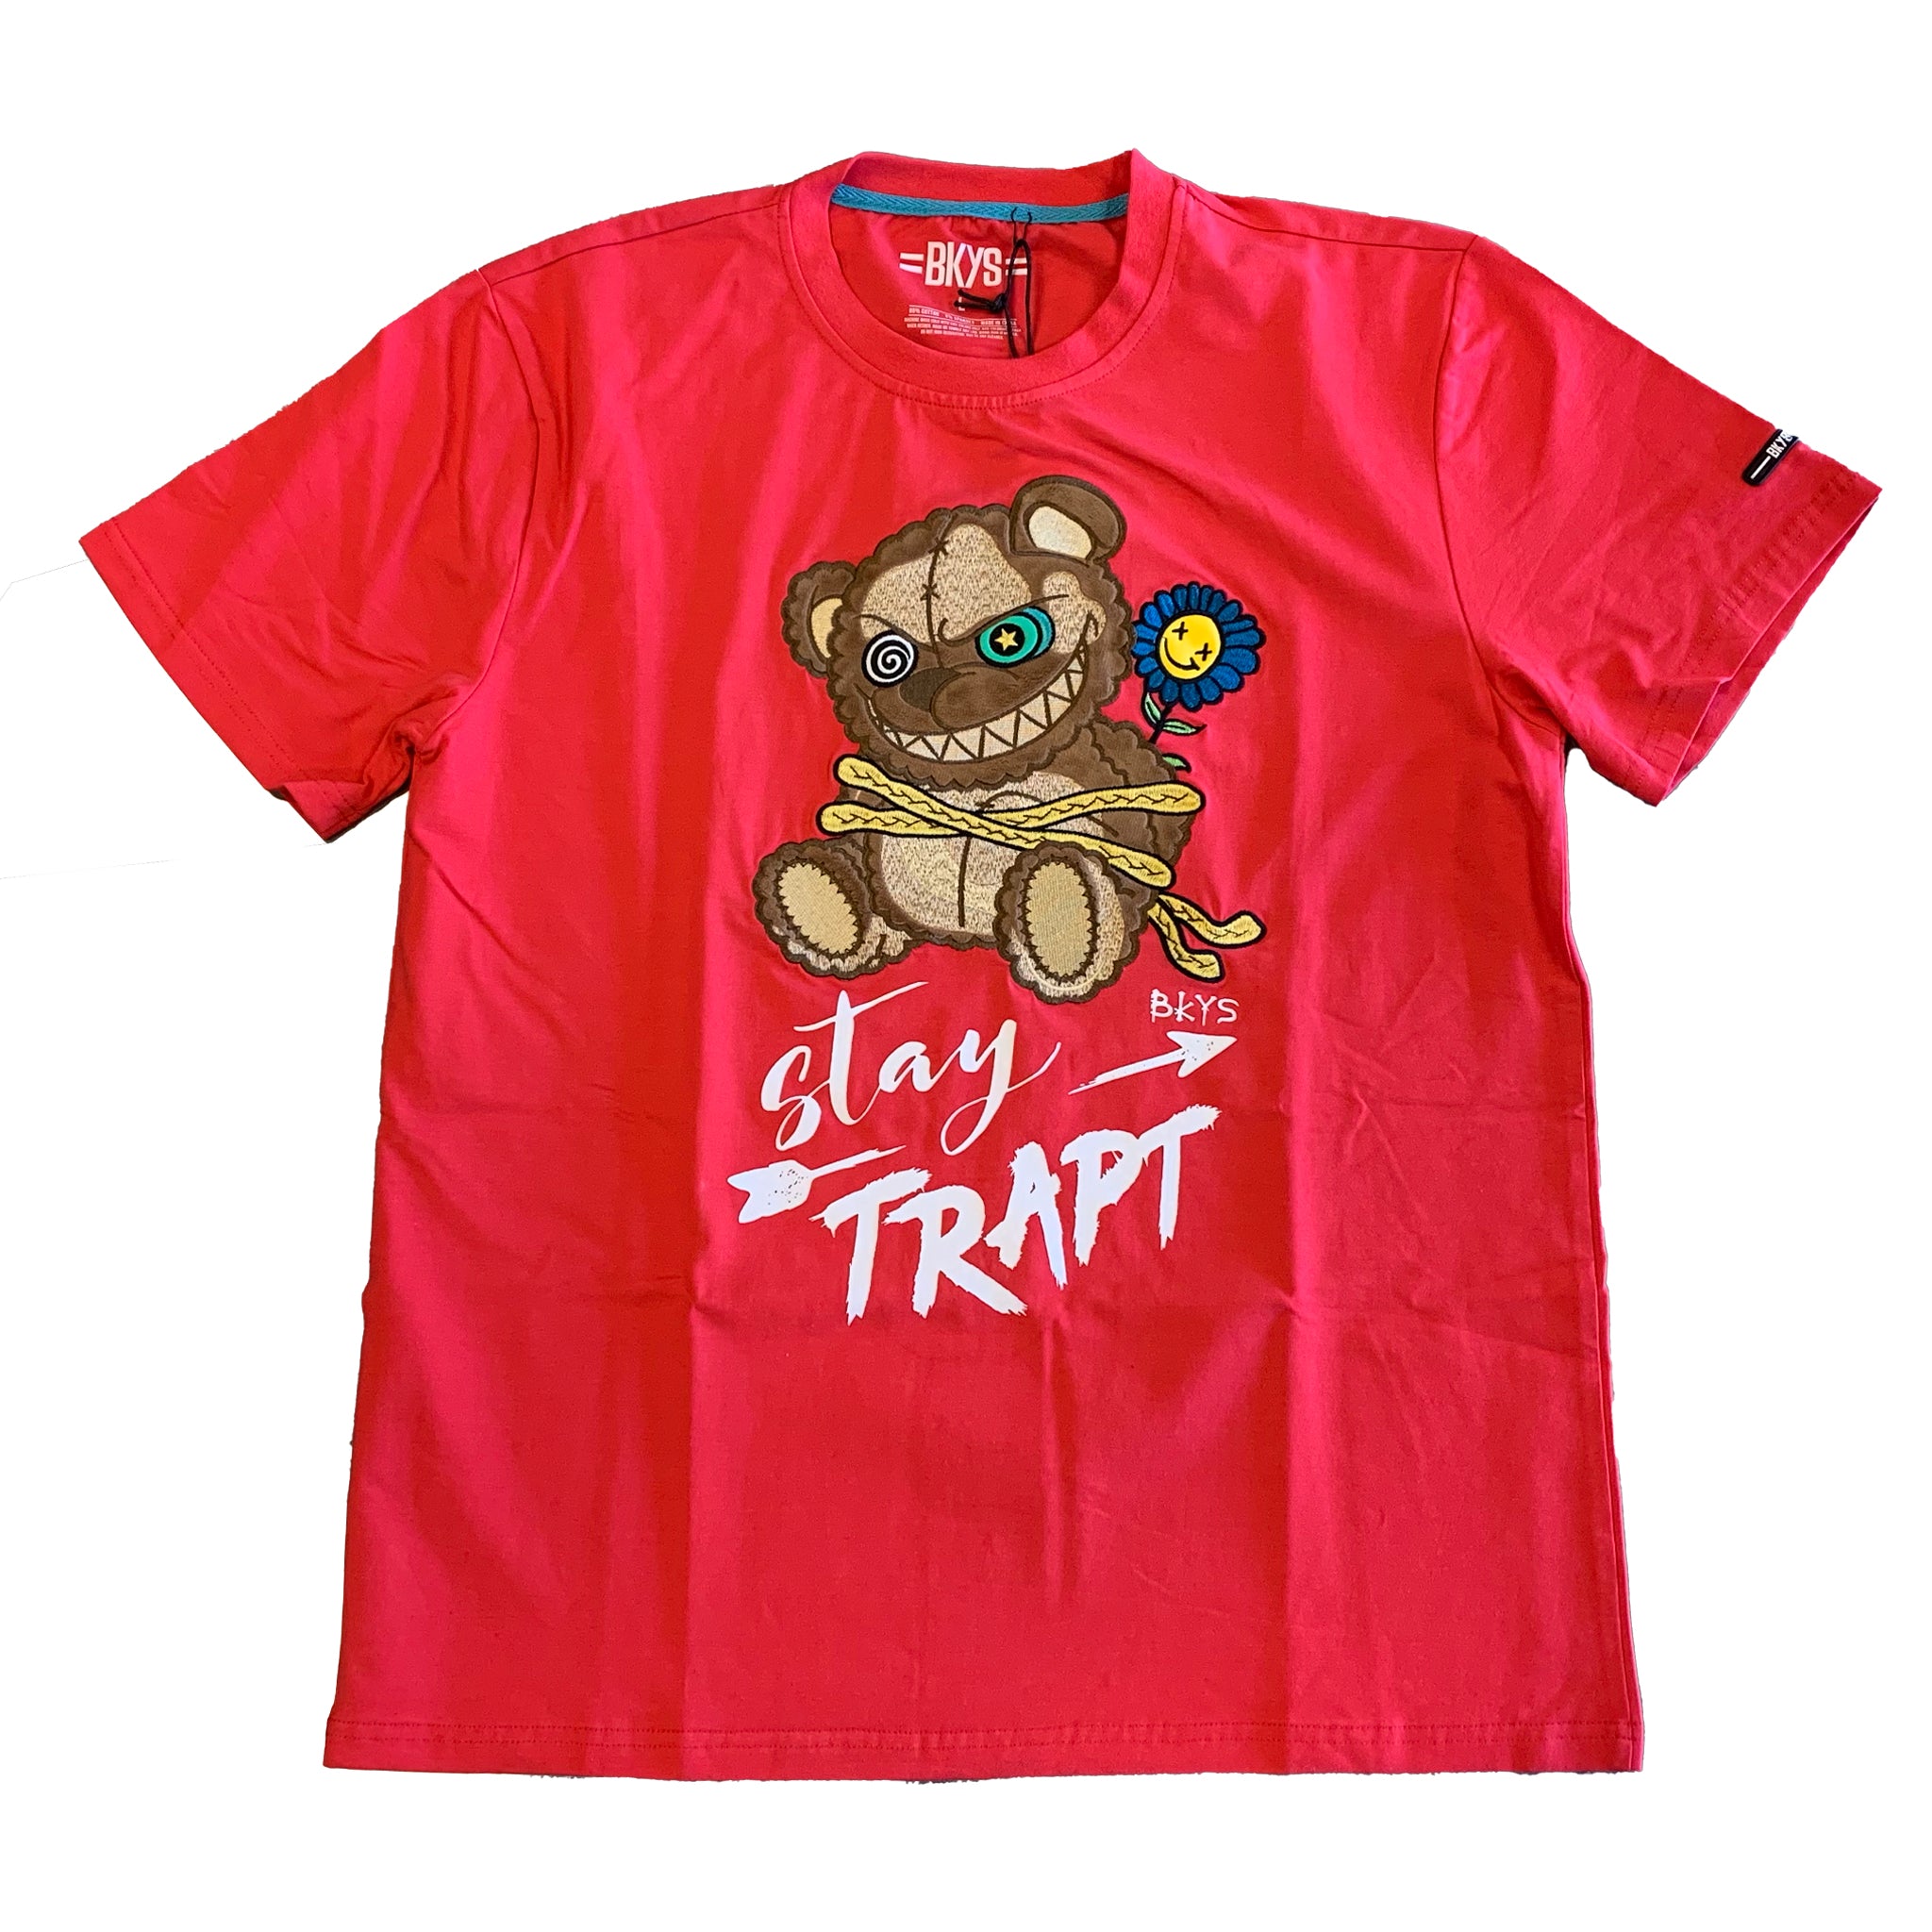 Stay Trapt Tee